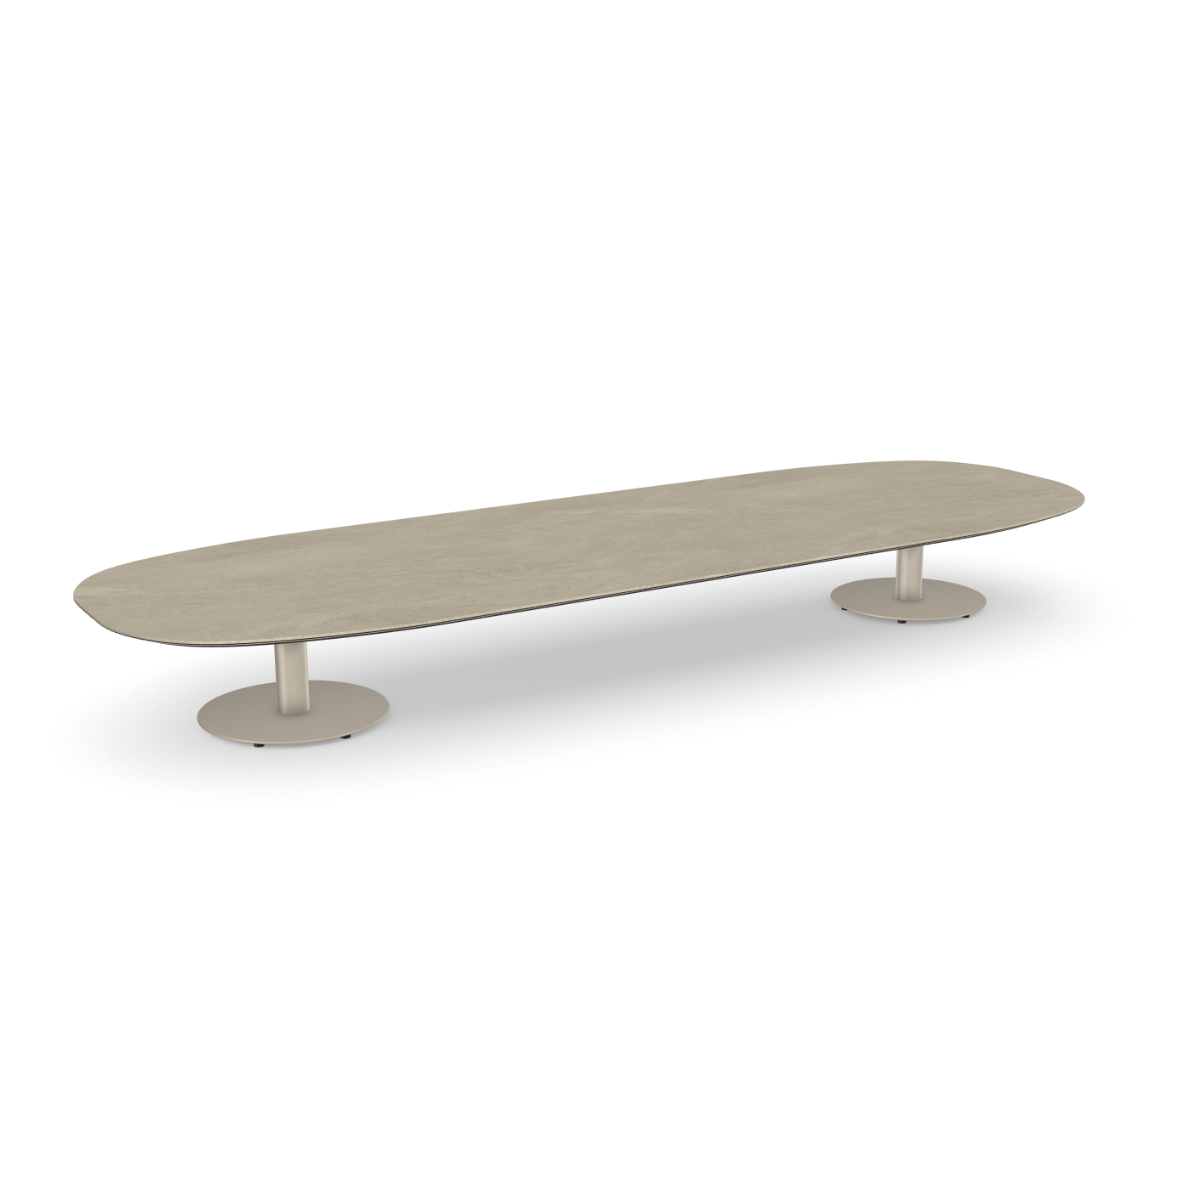 Tribù T-TABLE oval coffee table 298 cm